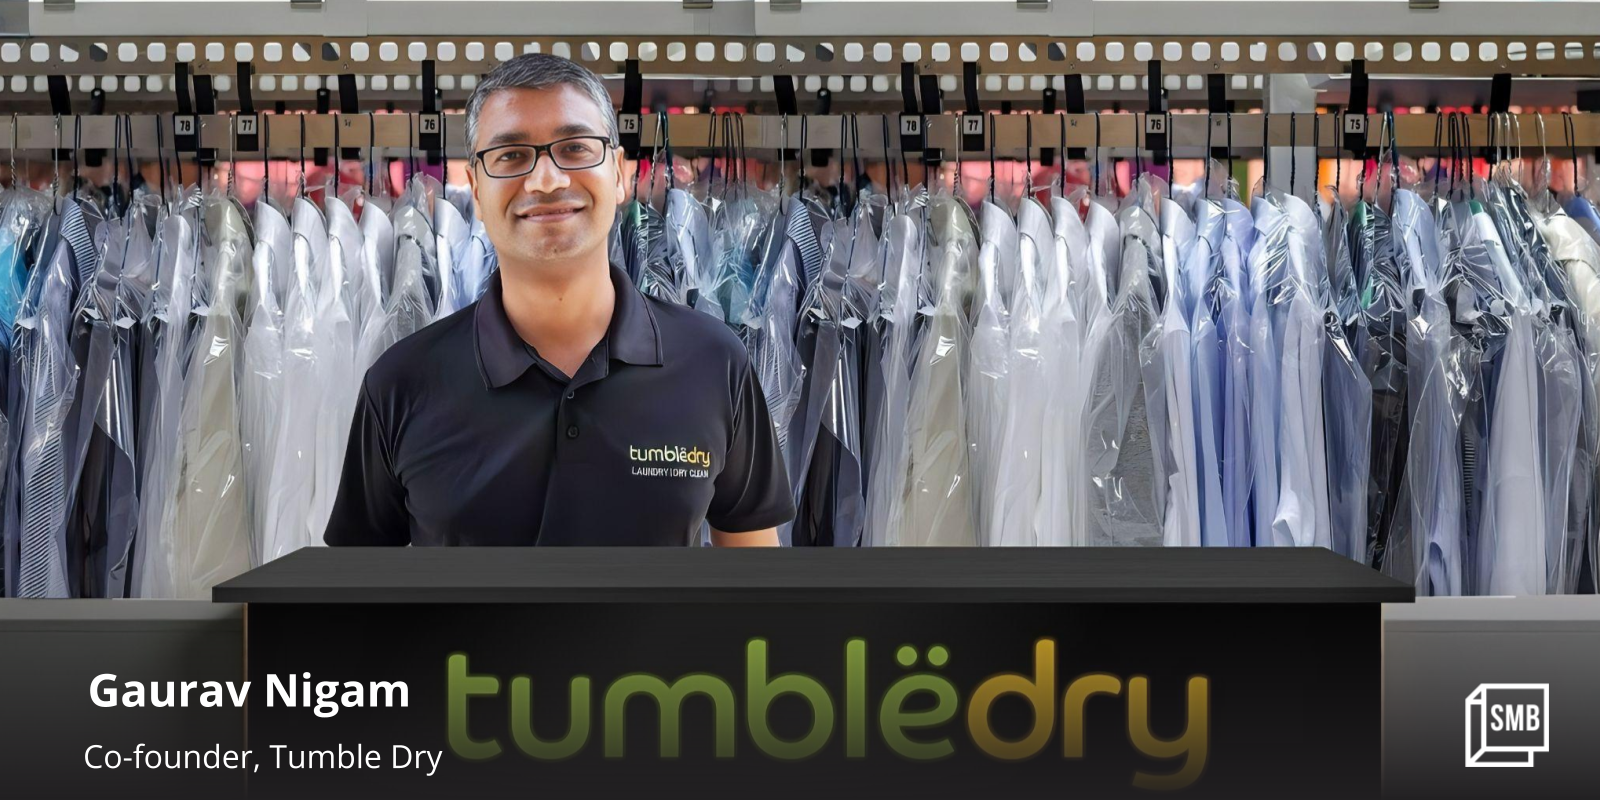 With 600+ stores in 198 cities, Tumbledry is changing India’s laundry market